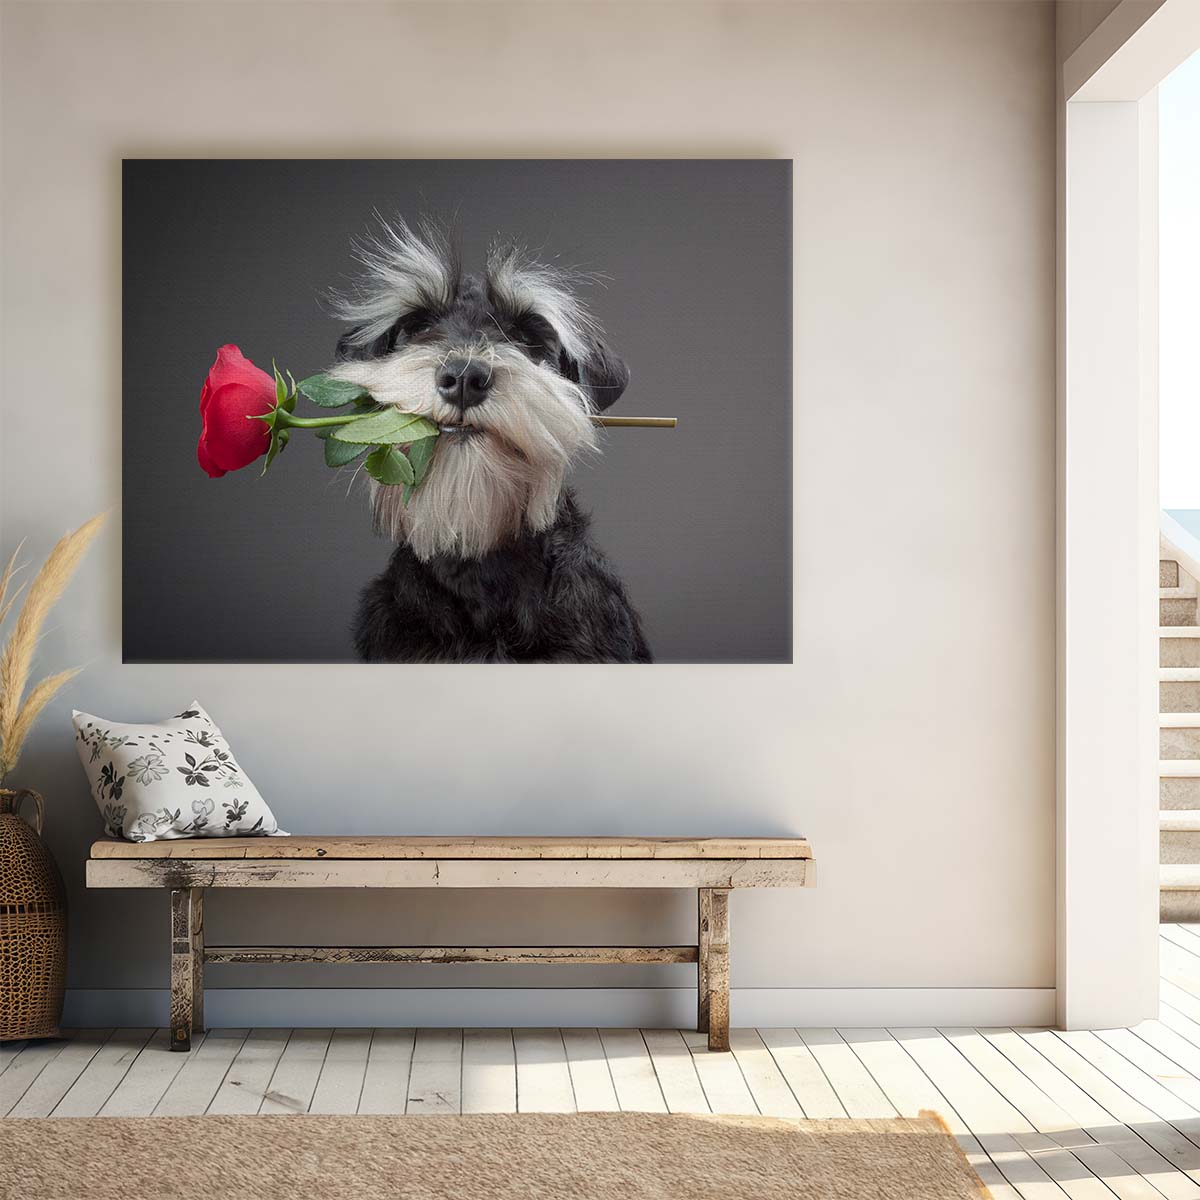 Romantic Schnauzer & Rose Proposal Wall Art by Luxuriance Designs. Made in USA.